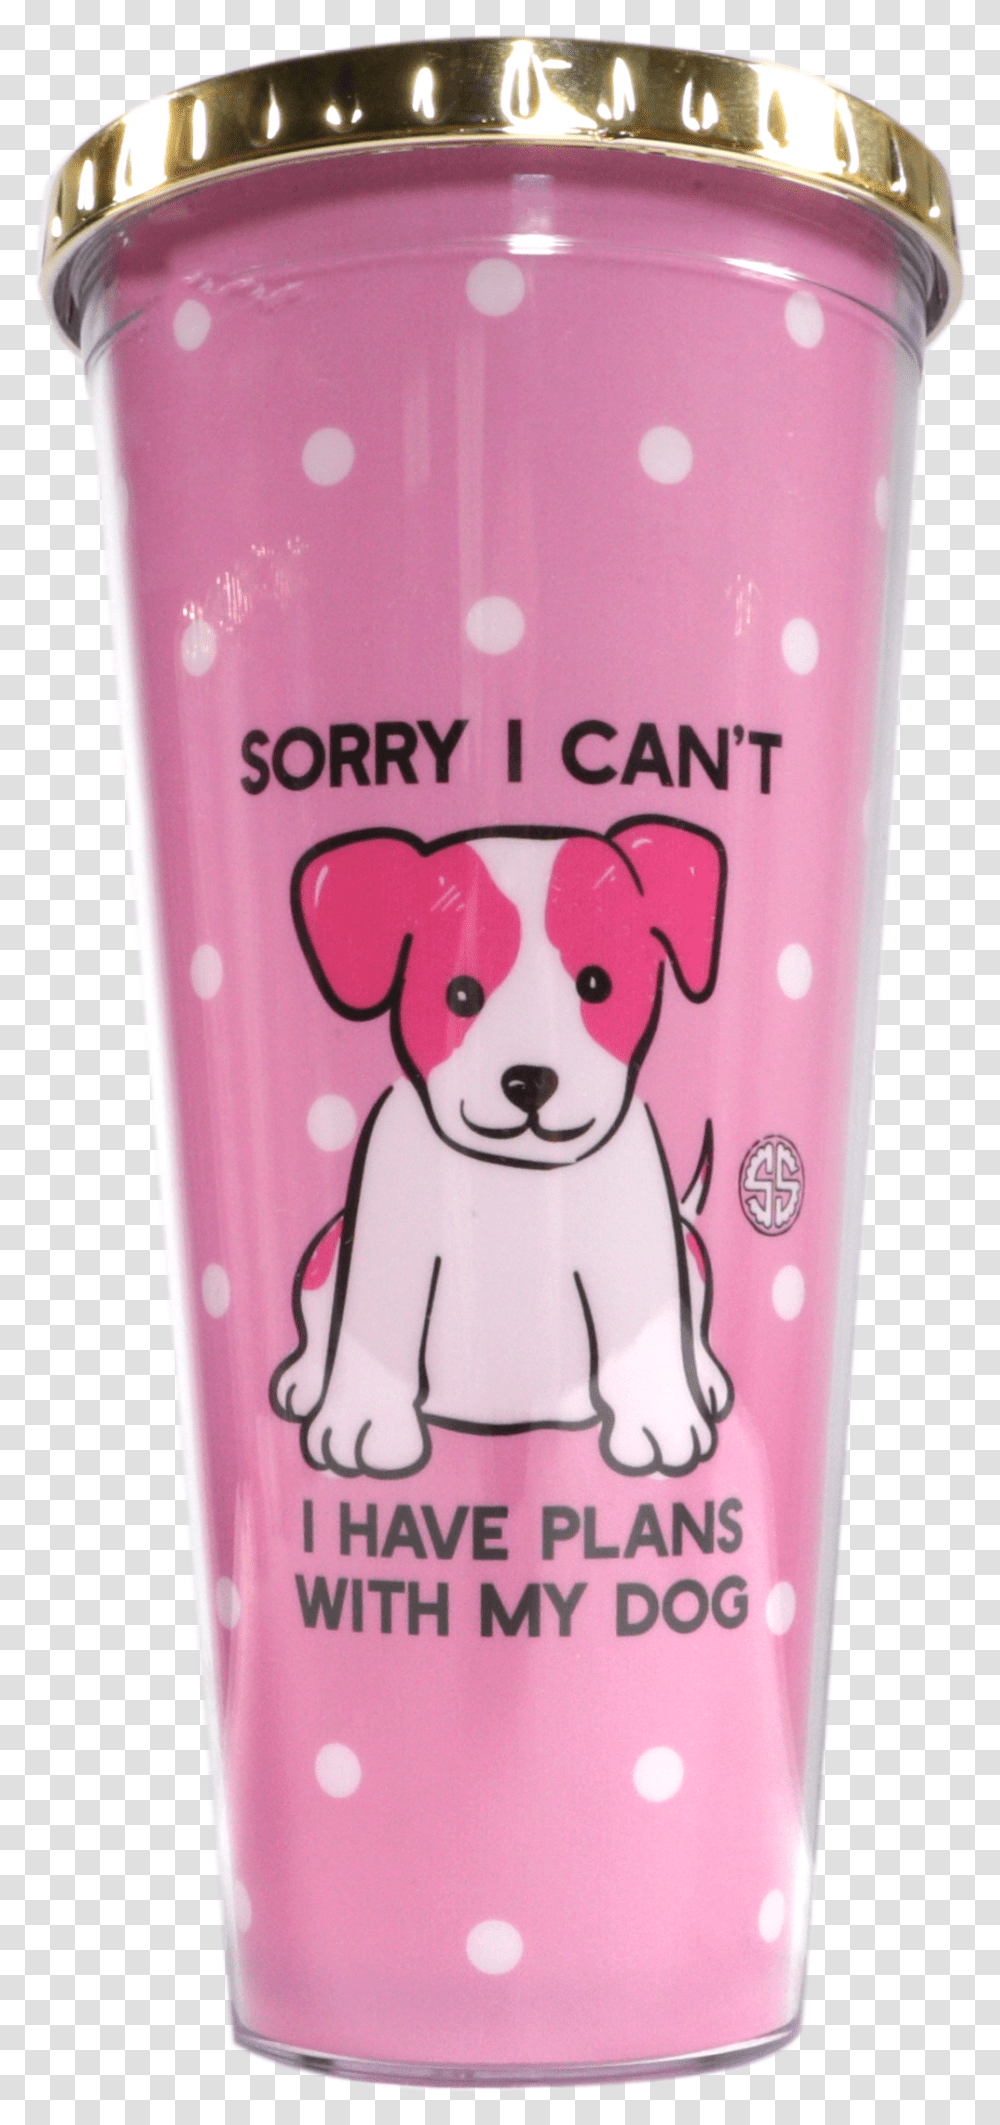 Sorry I Cant I Have Plans With My Dog Tumblr Simply, Bottle, Tin, Soda, Beverage Transparent Png